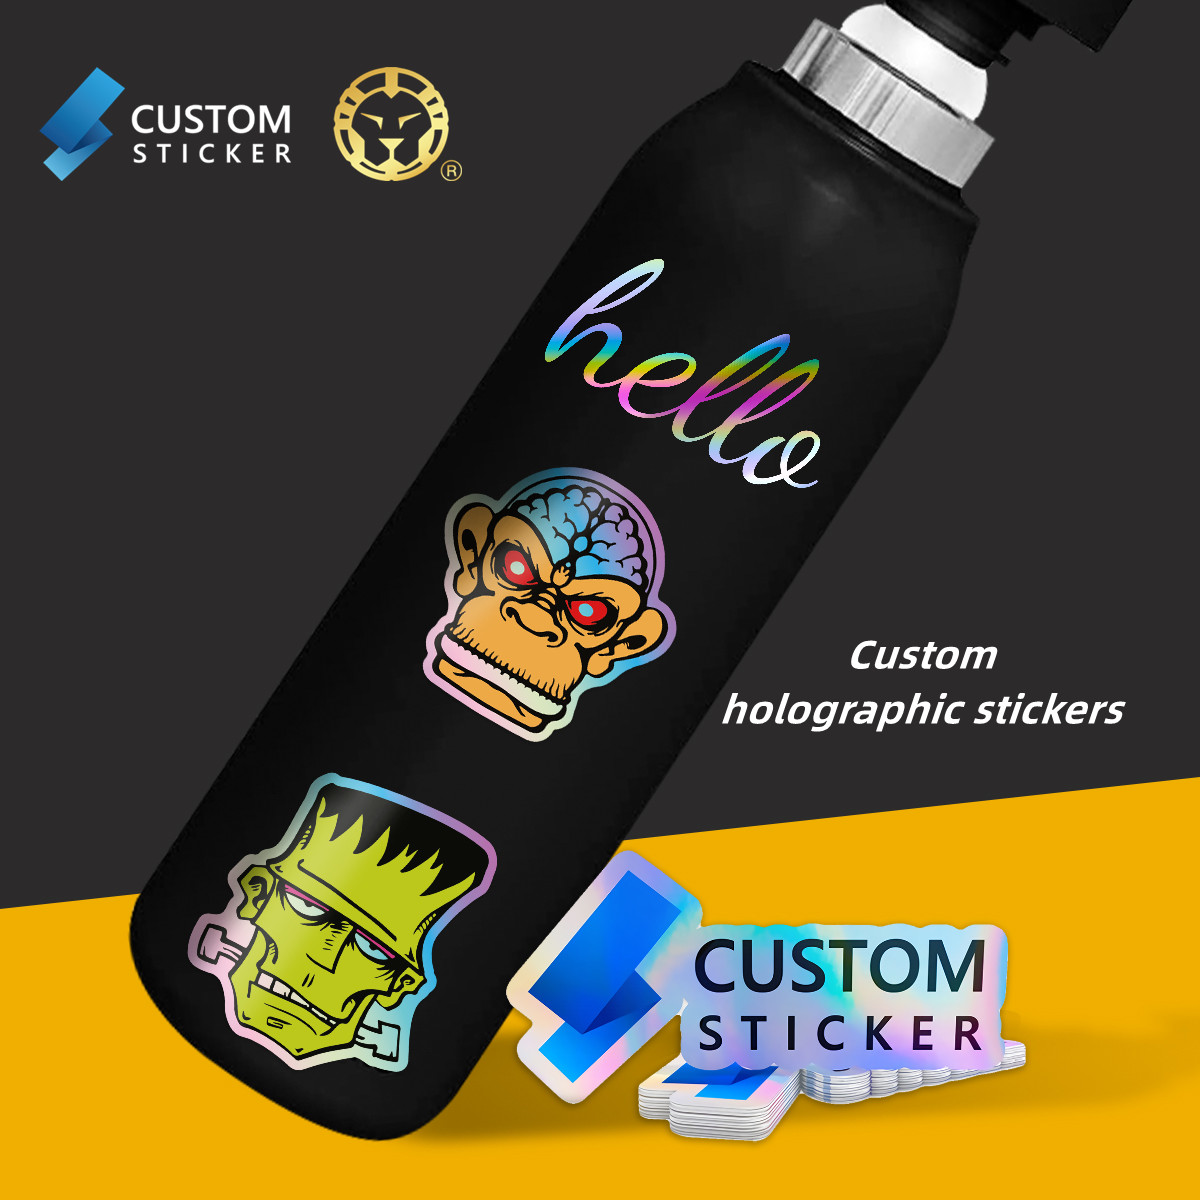 customsticker Holographic stickers